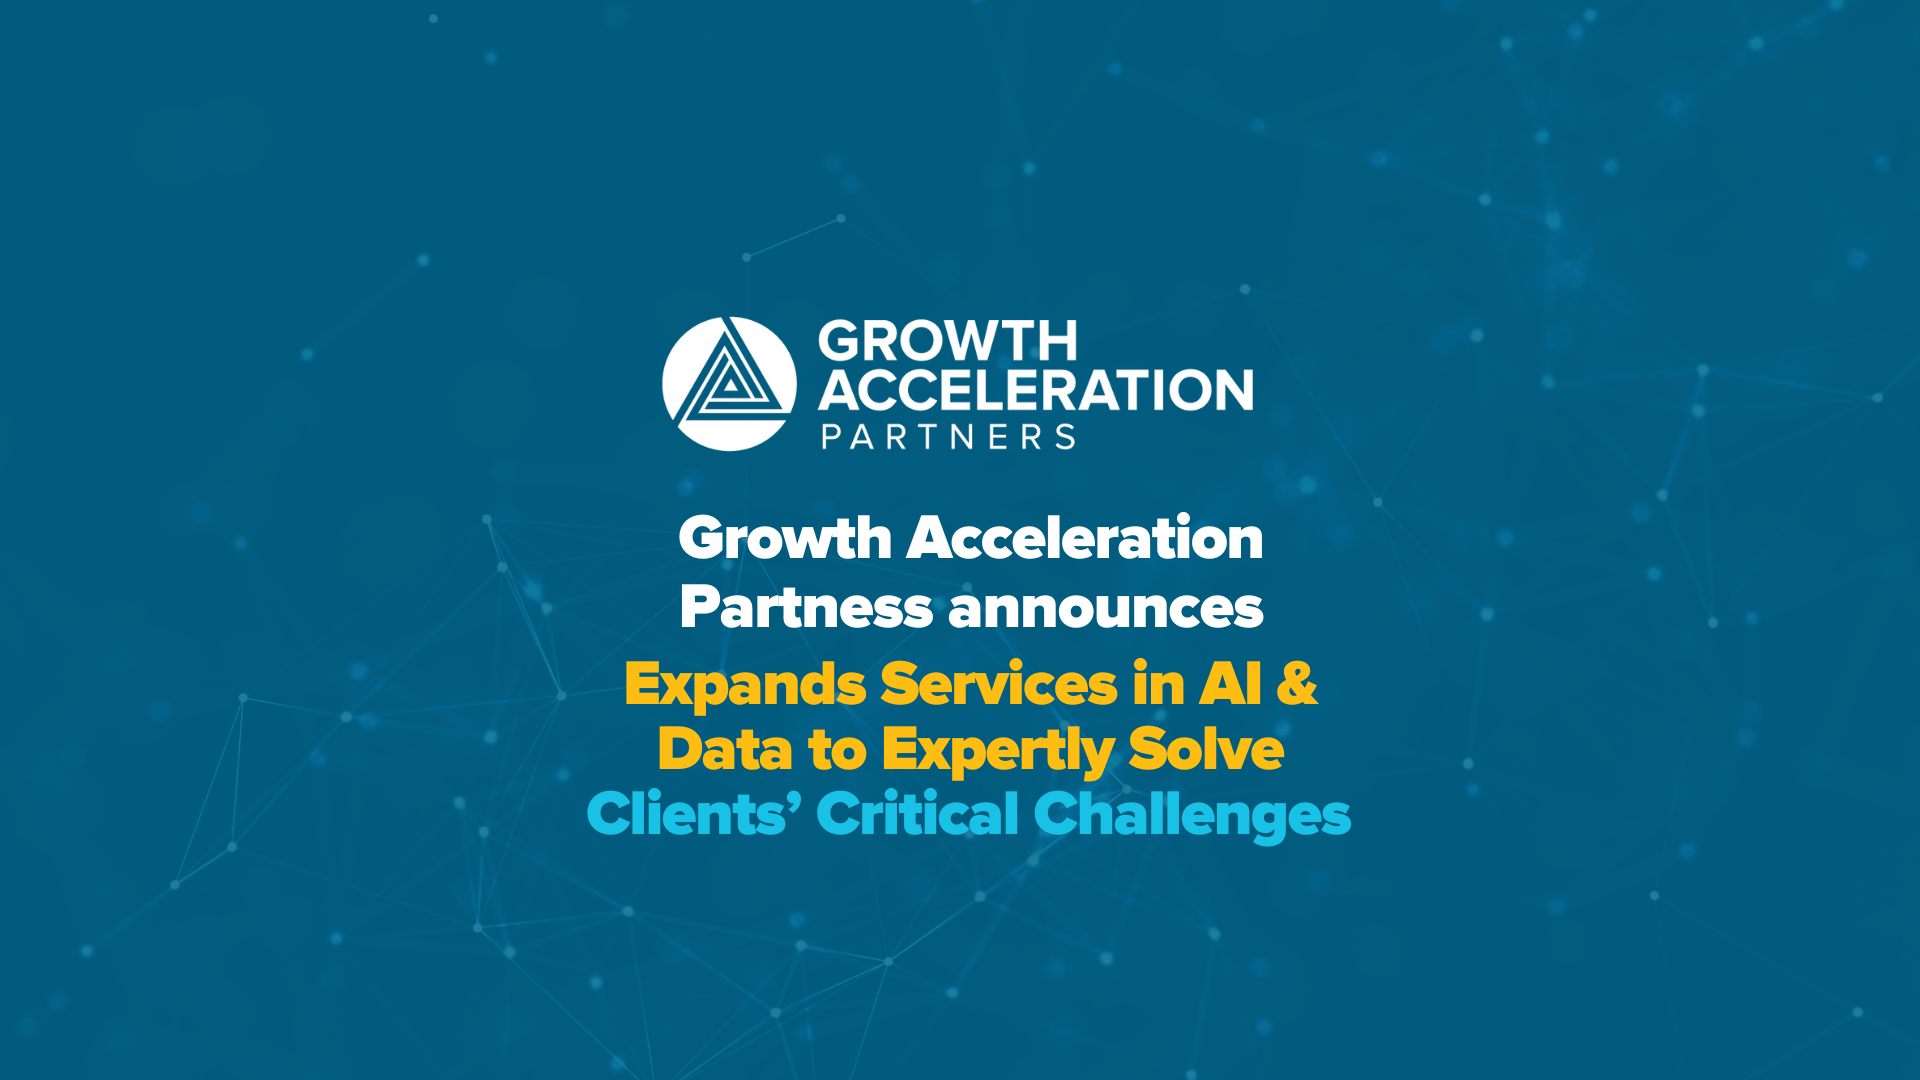 Growth Acceleration Partners Expands Services in AI and Data to Expertly Solve Clients’ Critical Challenges